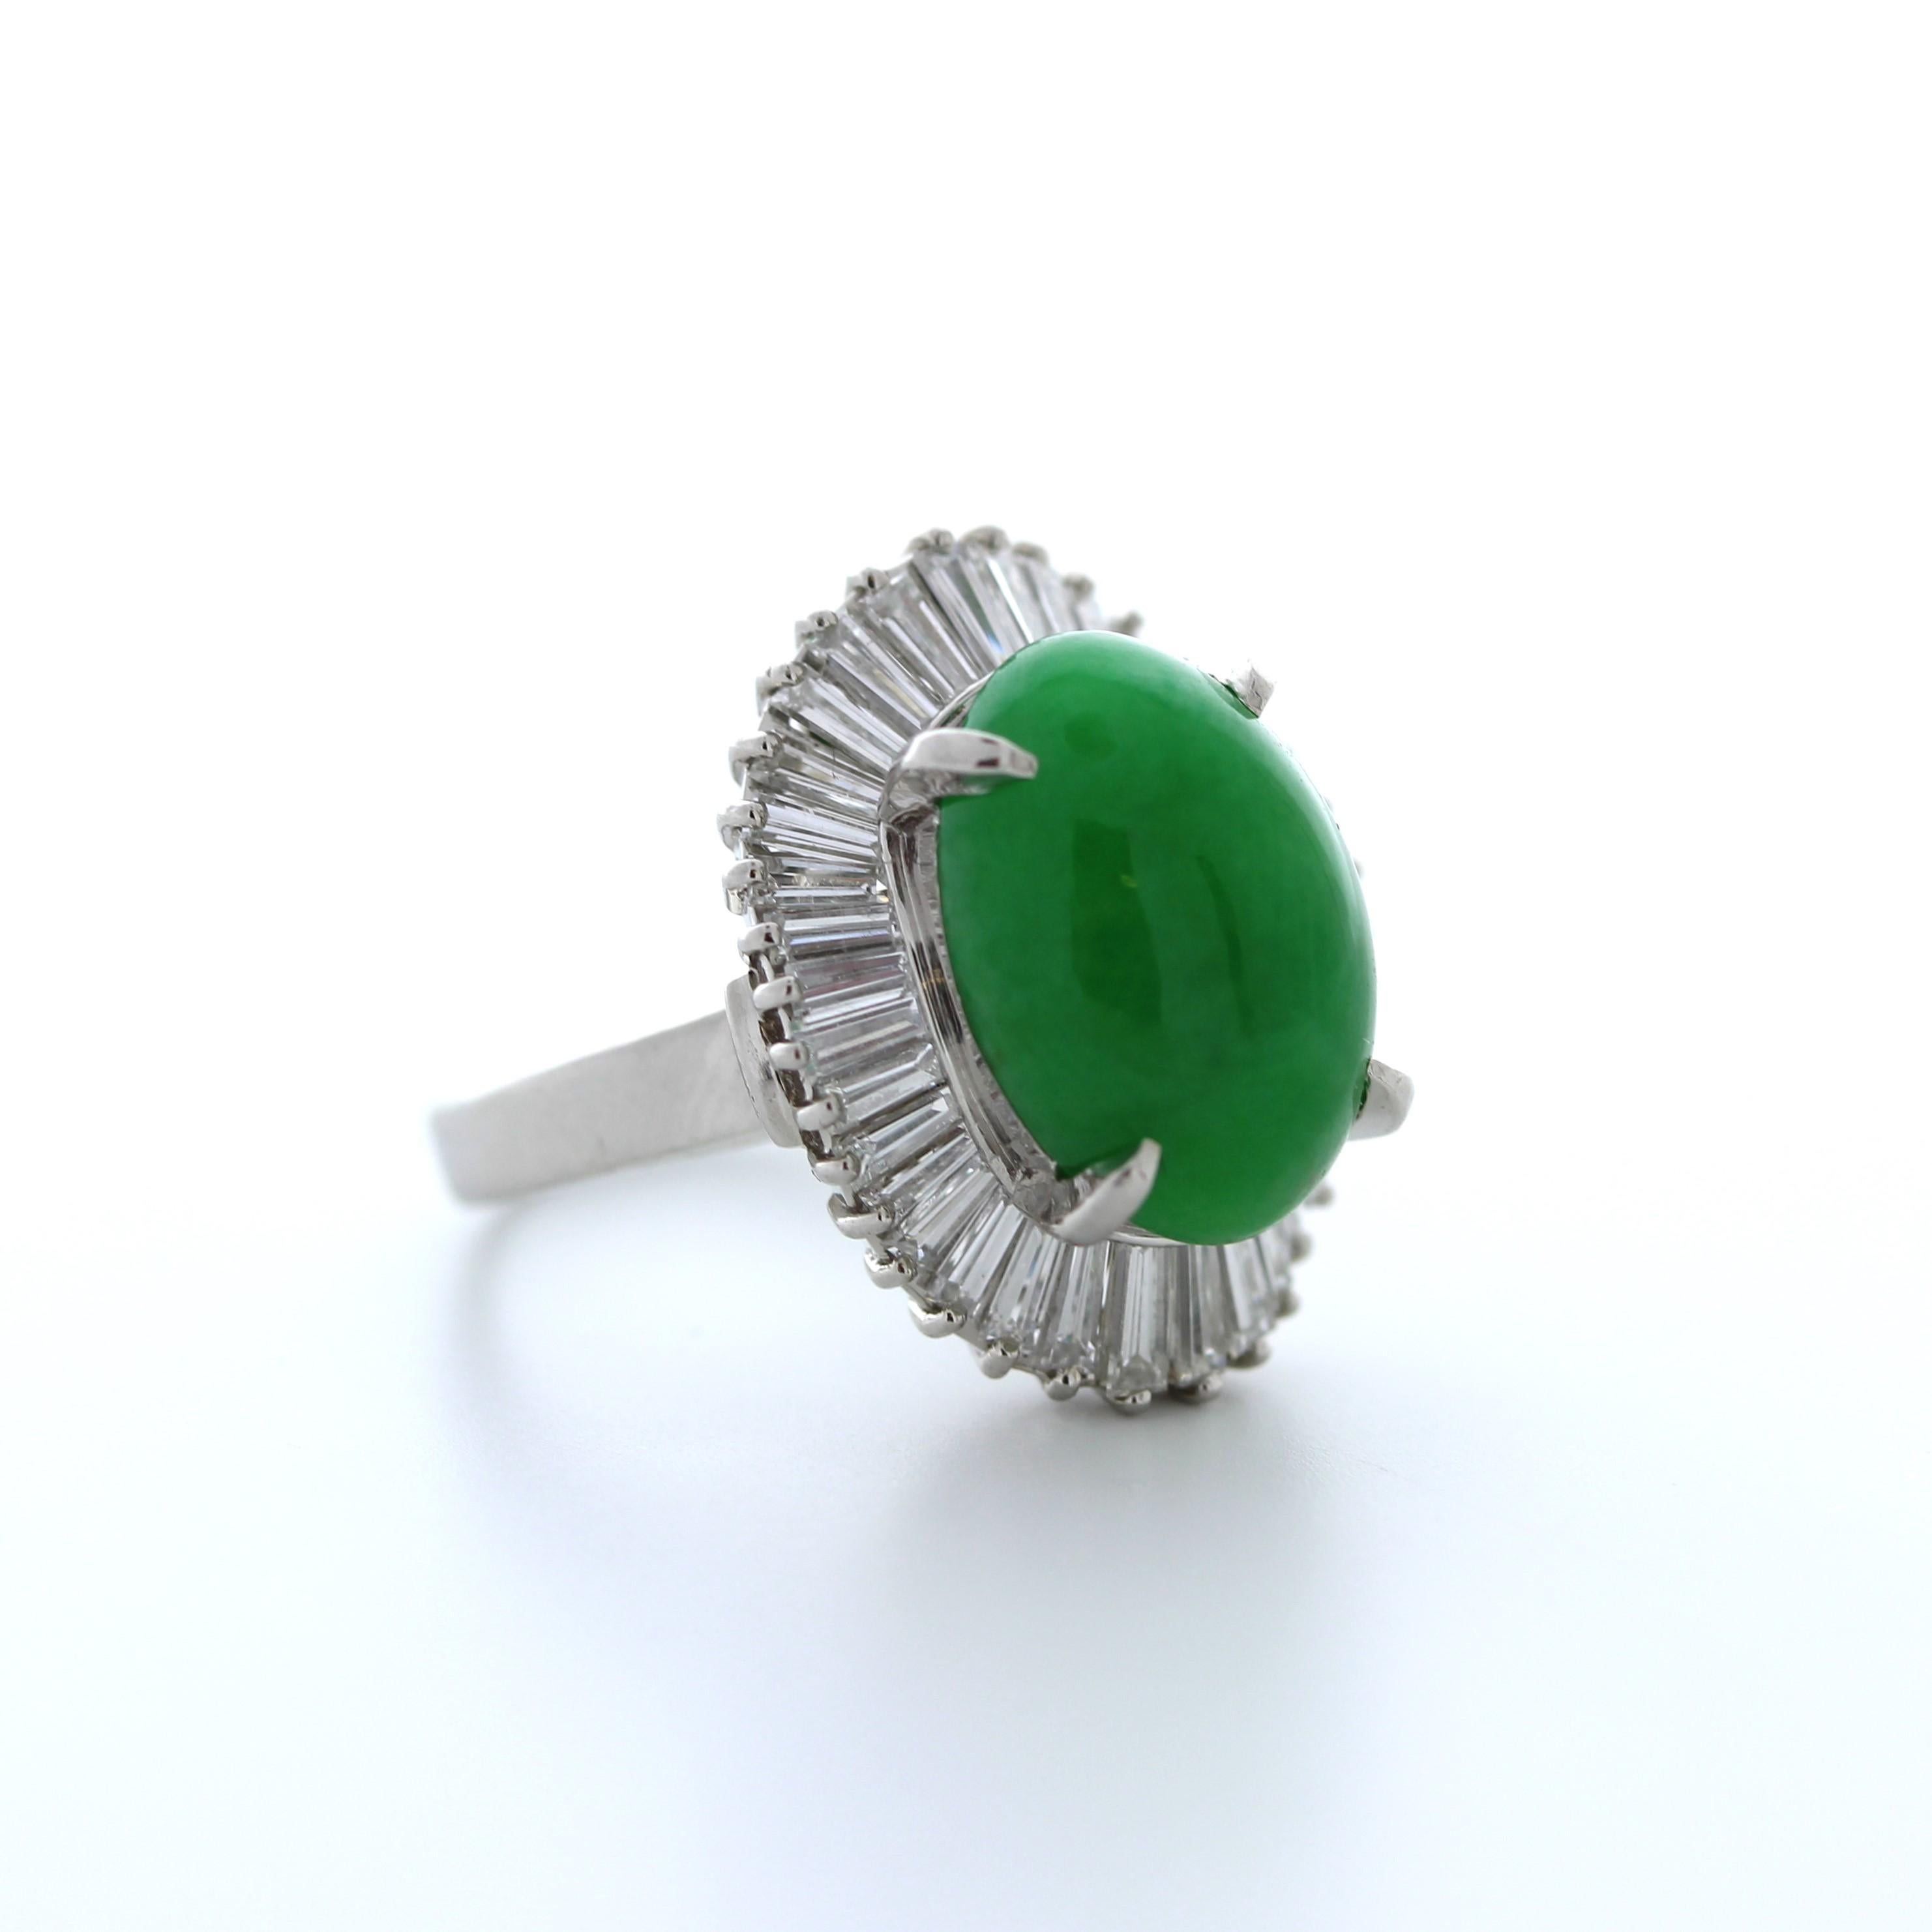 Overall, the 5.00 carat total weight green cabochon and 2.50 carat 37 baguette diamond fashion ring in platinum is a statement piece of jewelry that is perfect for those who want to add a touch of luxury and sophistication to their wardrobe. It is